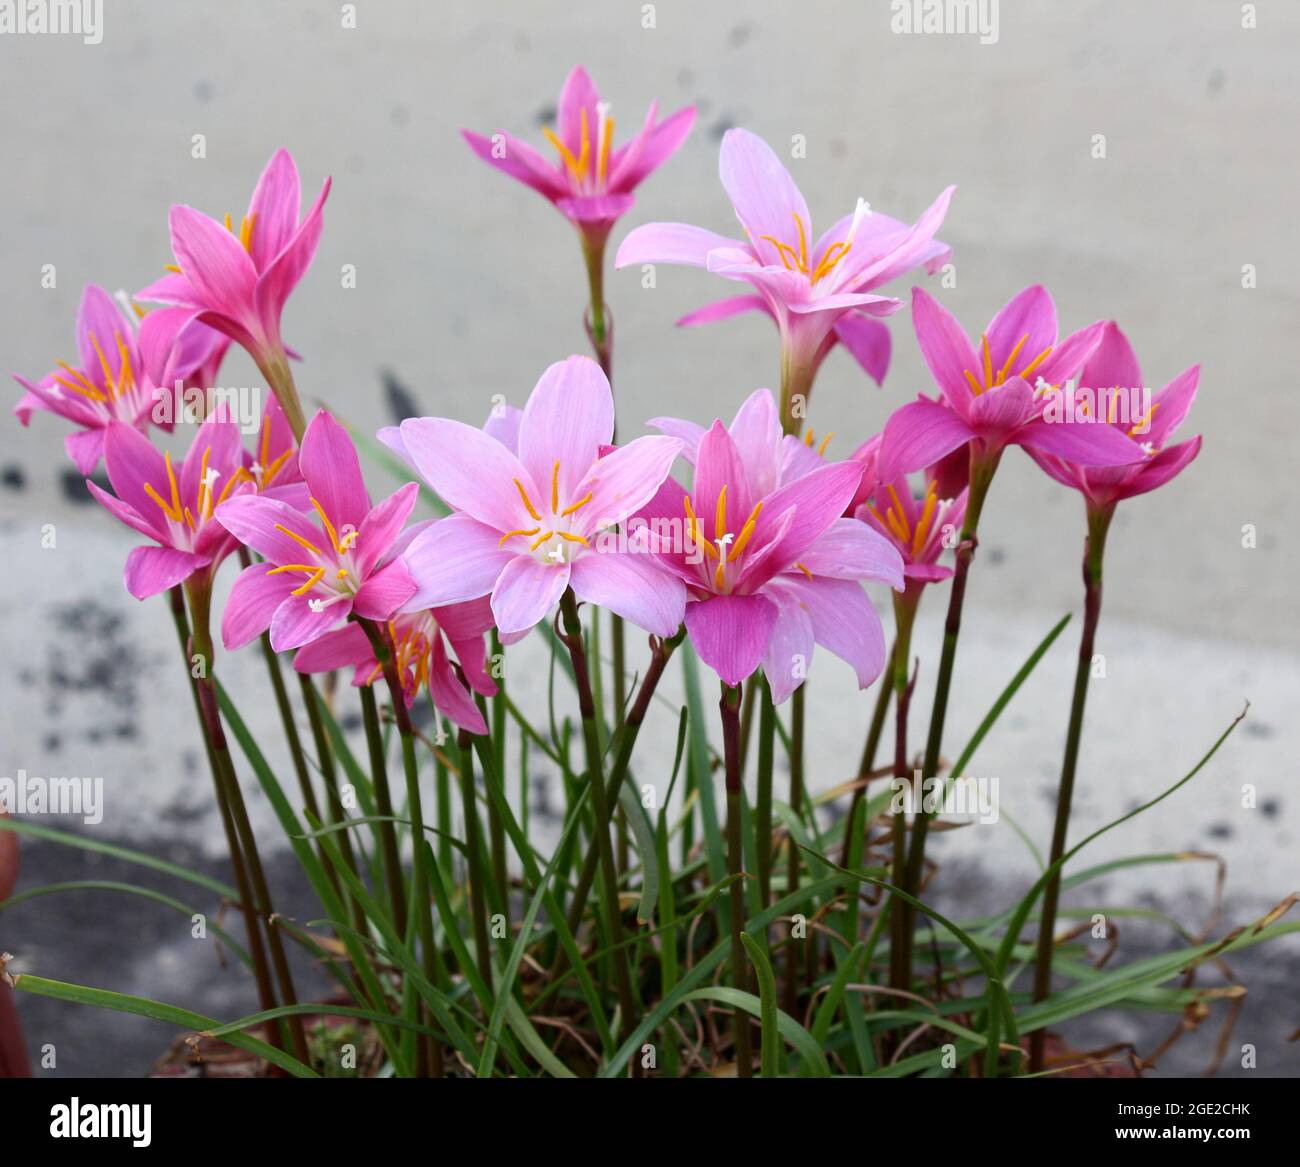 Pink rain lilies - both species (Zephyranthes rosea) light pink and (Zephyranthes carinata) dark pink can be seen here Stock Photo